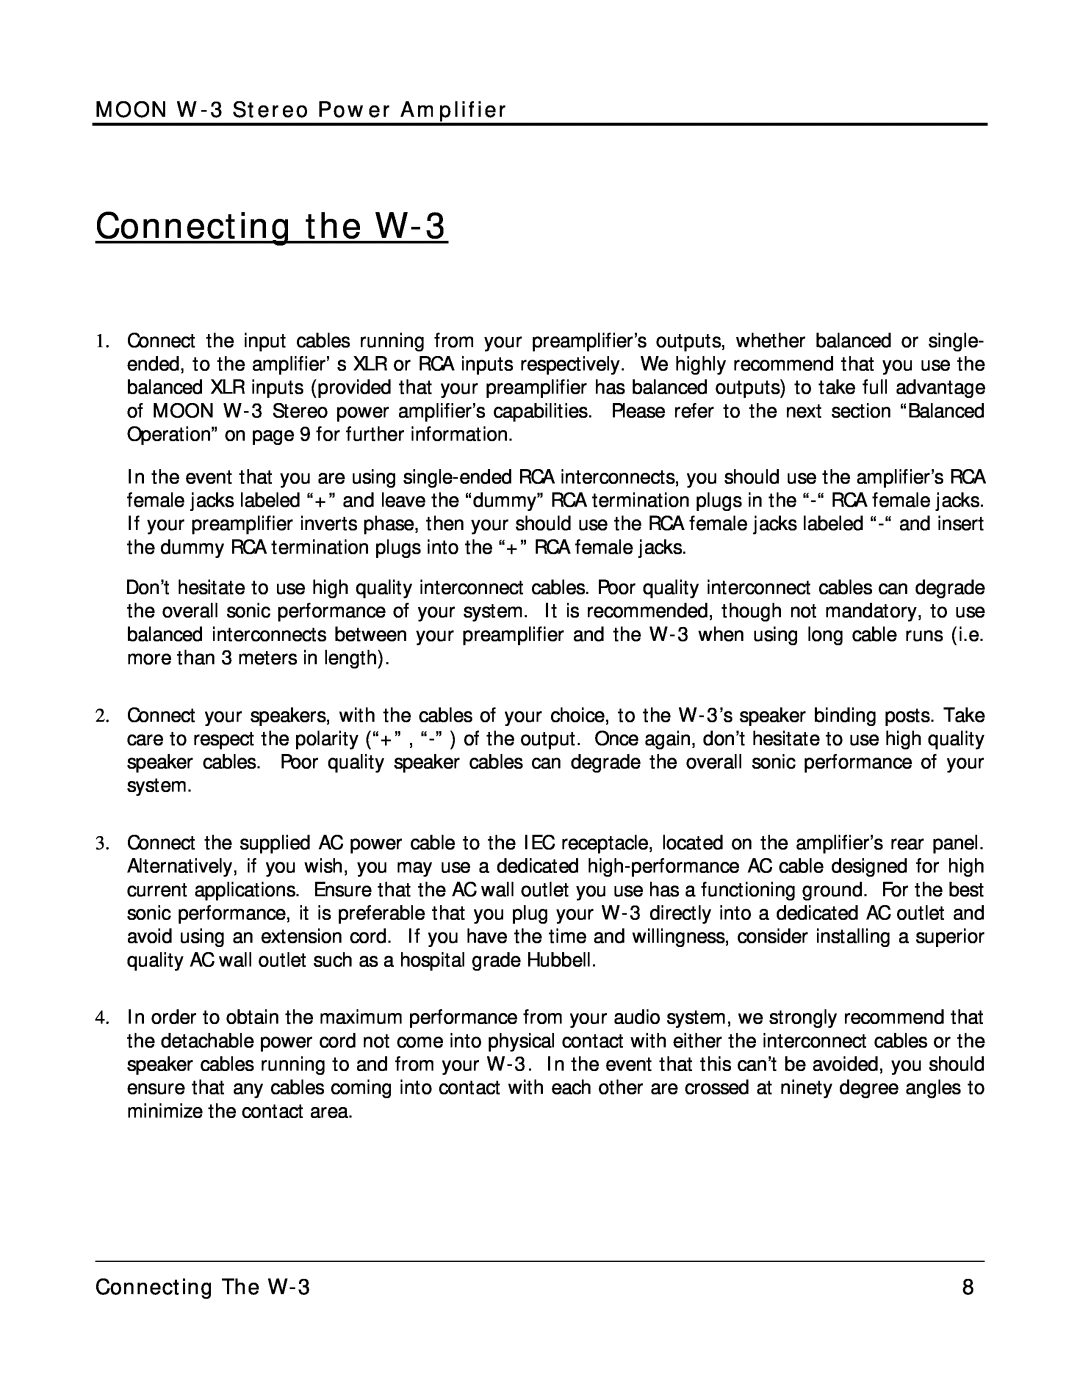 Simaudio owner manual Connecting the W-3, Connecting The W-3, MOON W-3Stereo Power Amplifier 